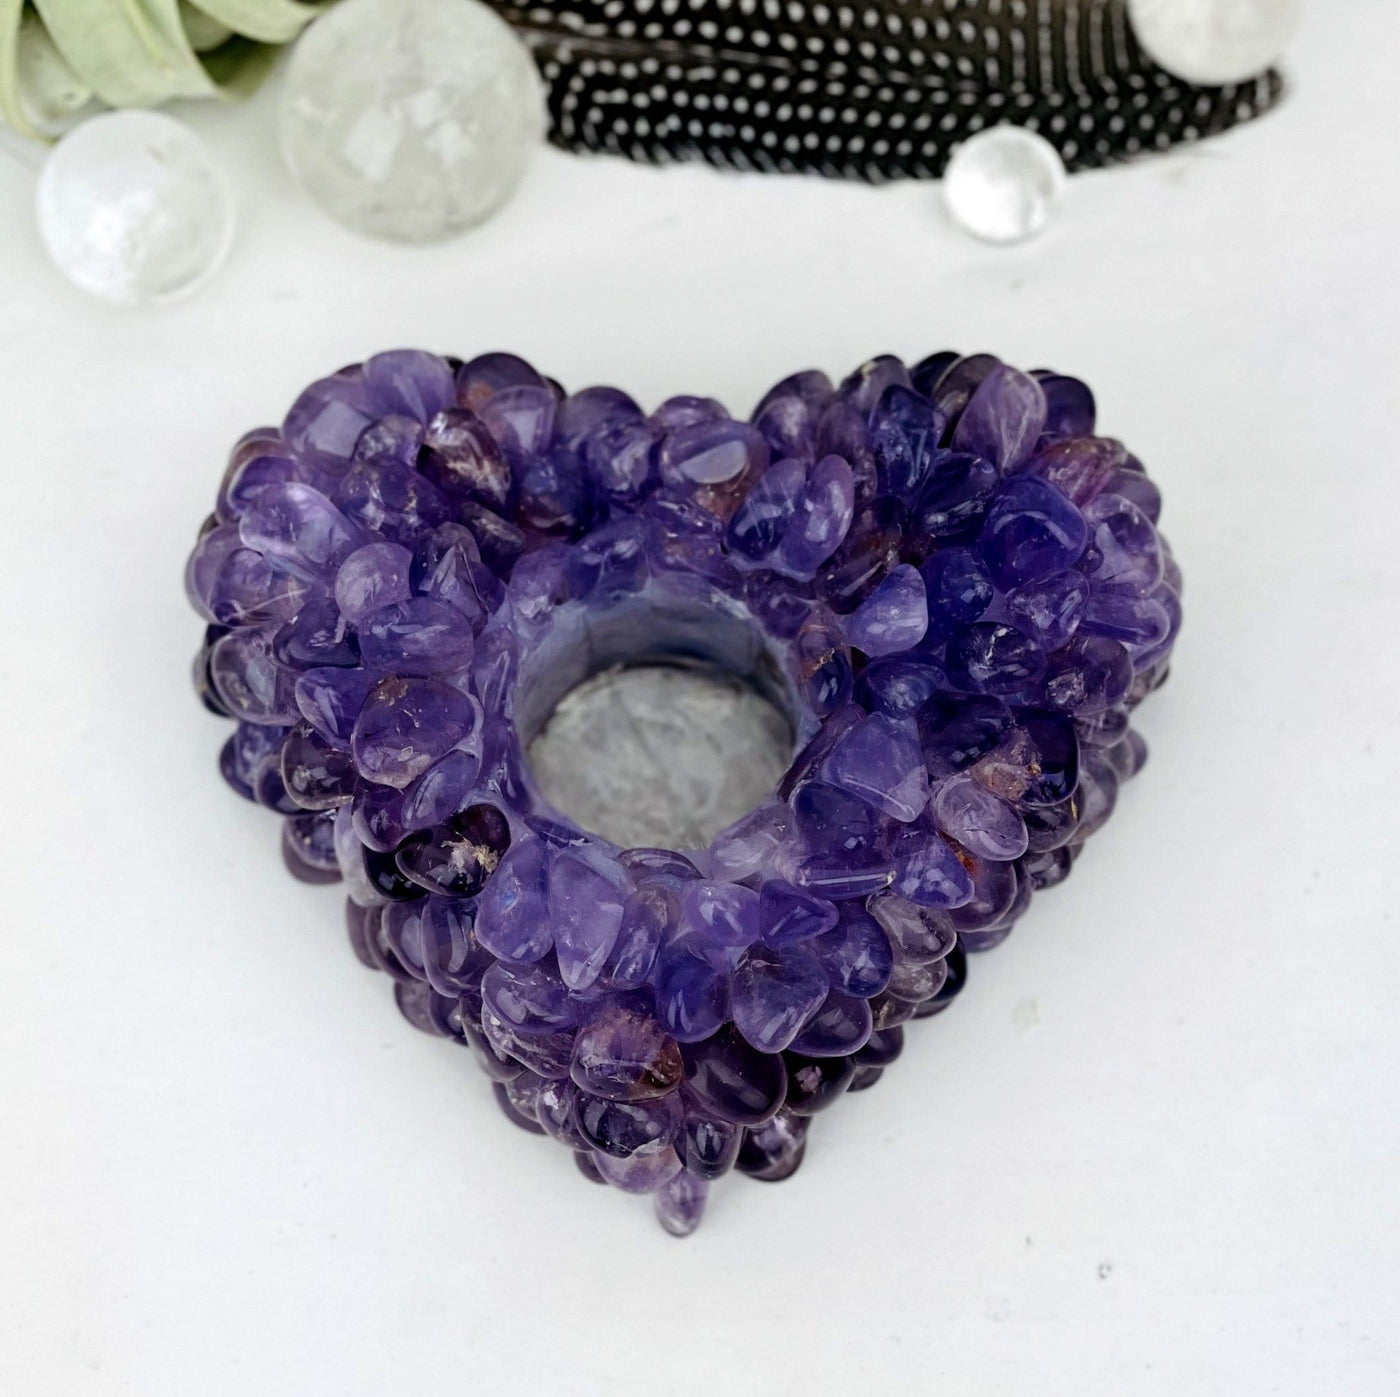 up close shot of amethyst tumbled stone heart candle holder with decorations in the background